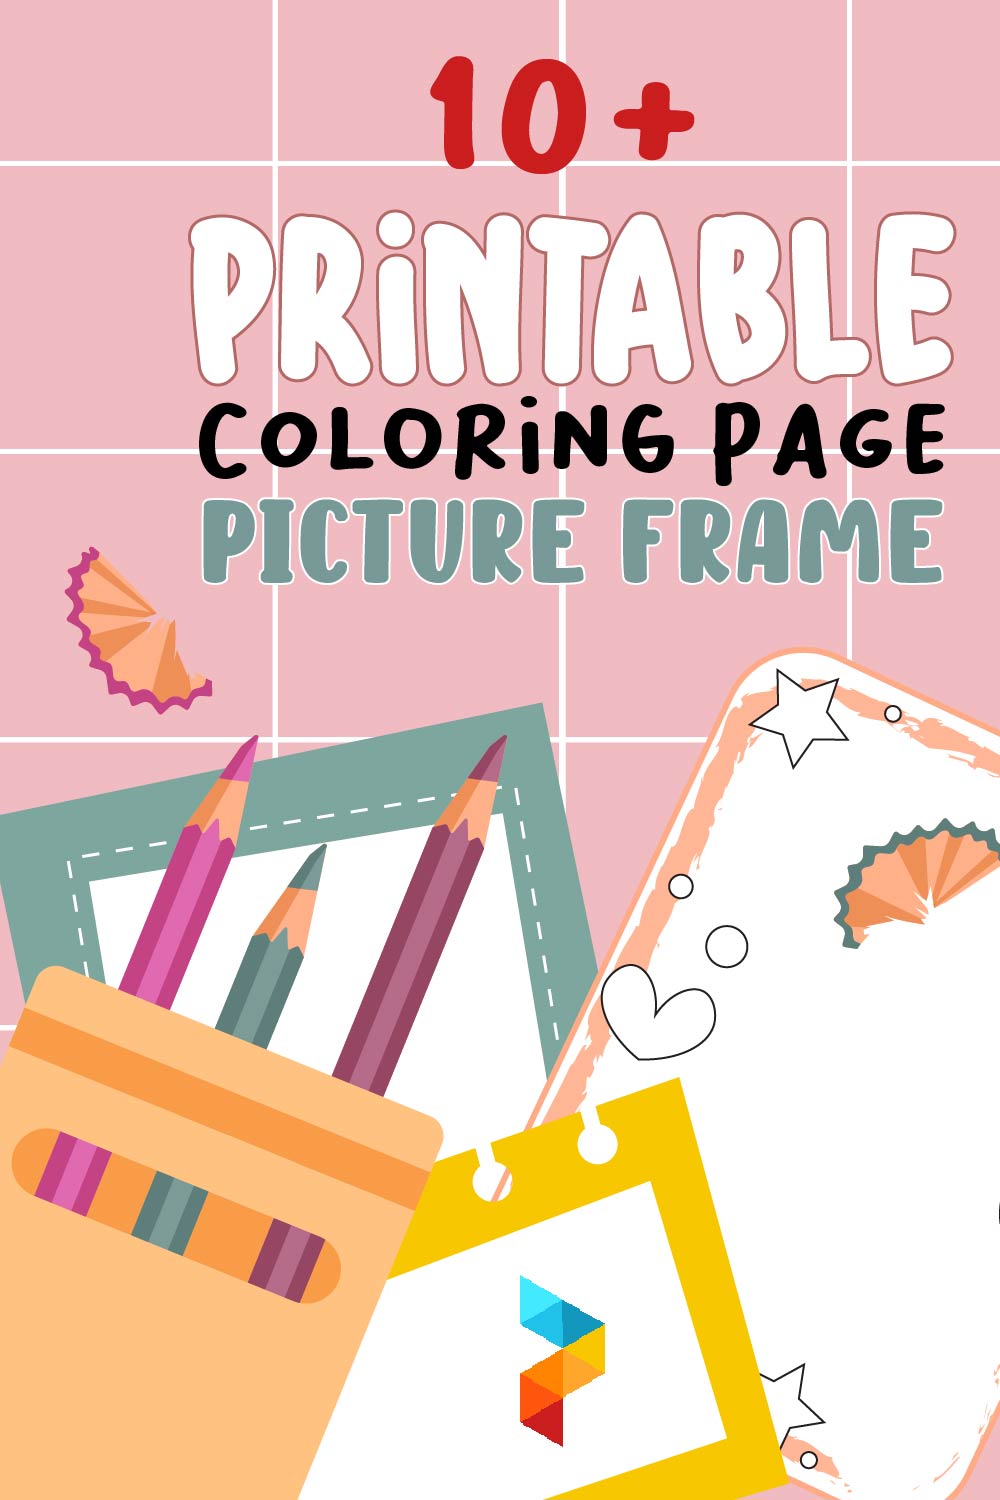 Printable Coloring Page Picture Frame